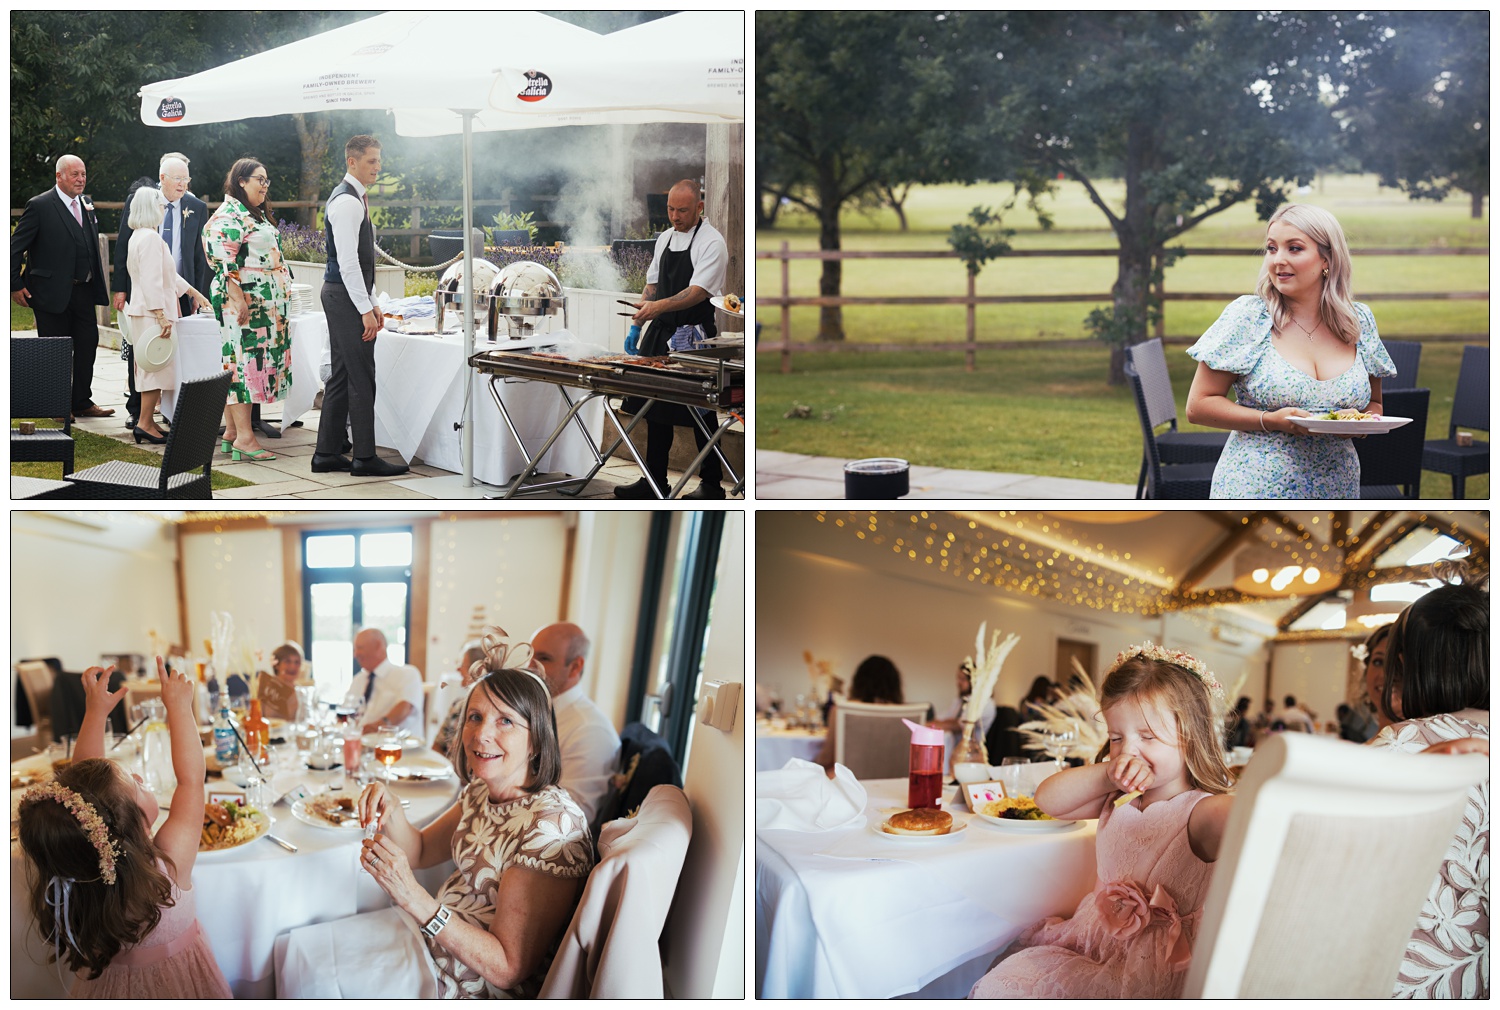 A wedding barbecue at Fynn Valley Terrace.